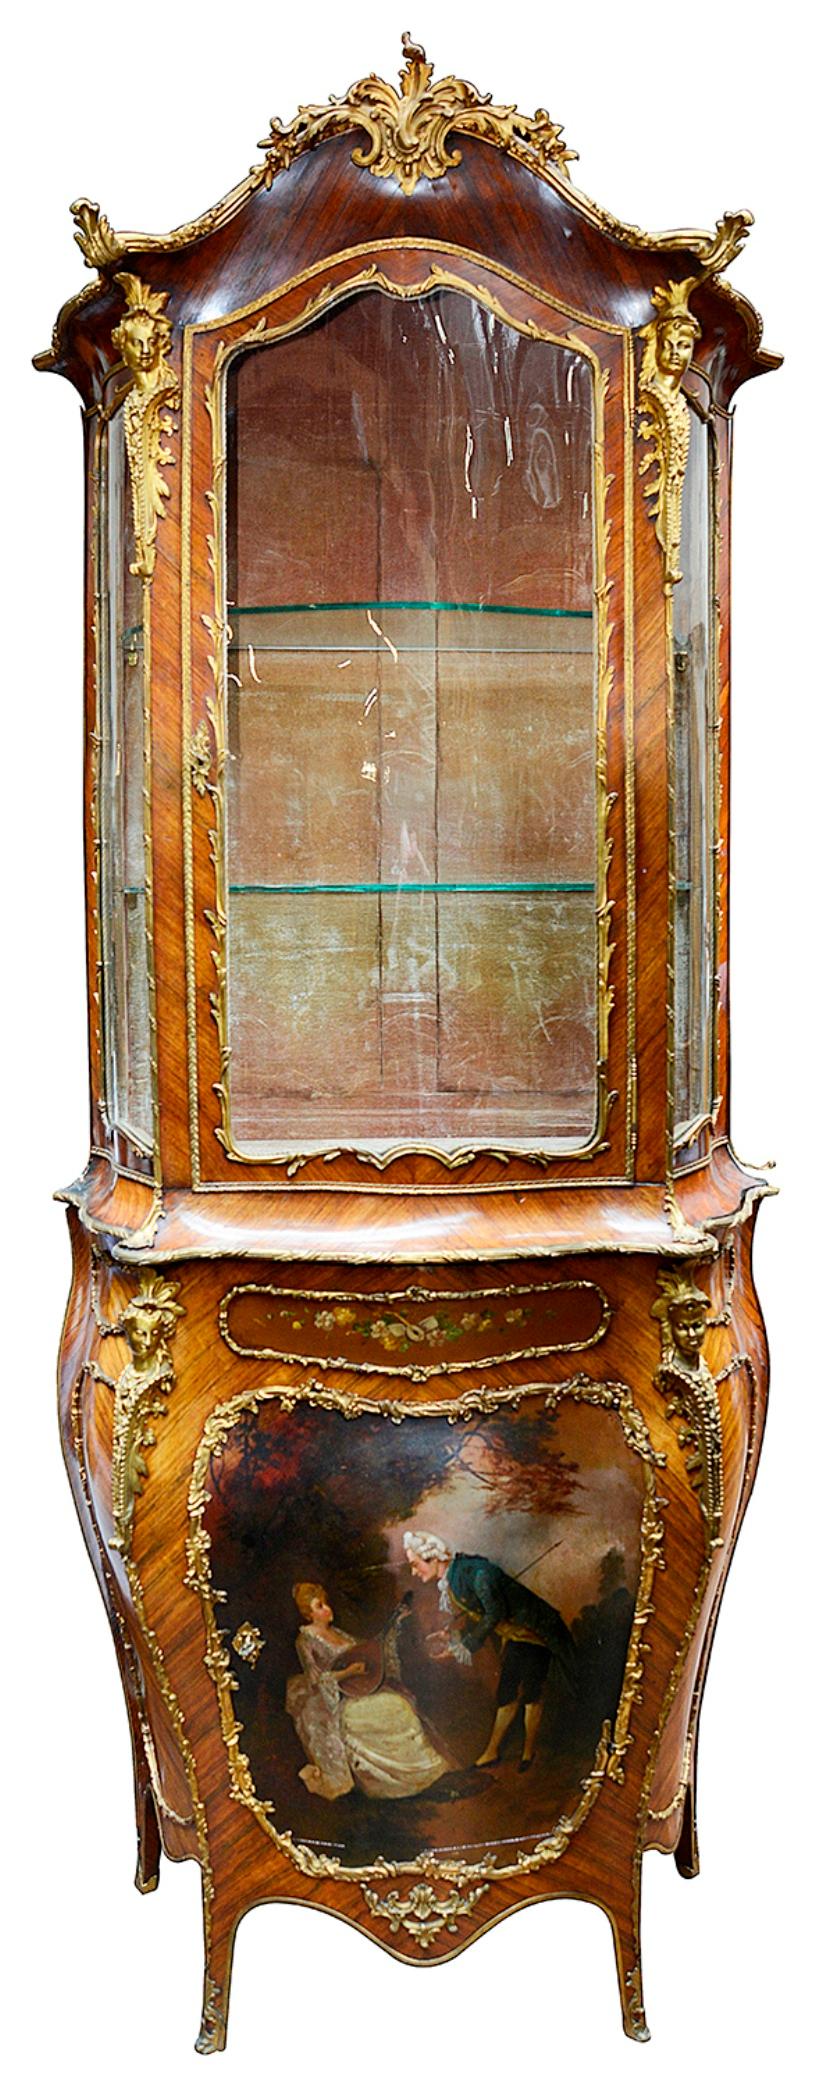 A very good quality late 19th century French verni martin vitrine. Having gilded ormolu monopodia and scolling foliate mounts, The serpentine sides and fronted glazed door opening to reveal glass shelves within. The single door having a hand painted